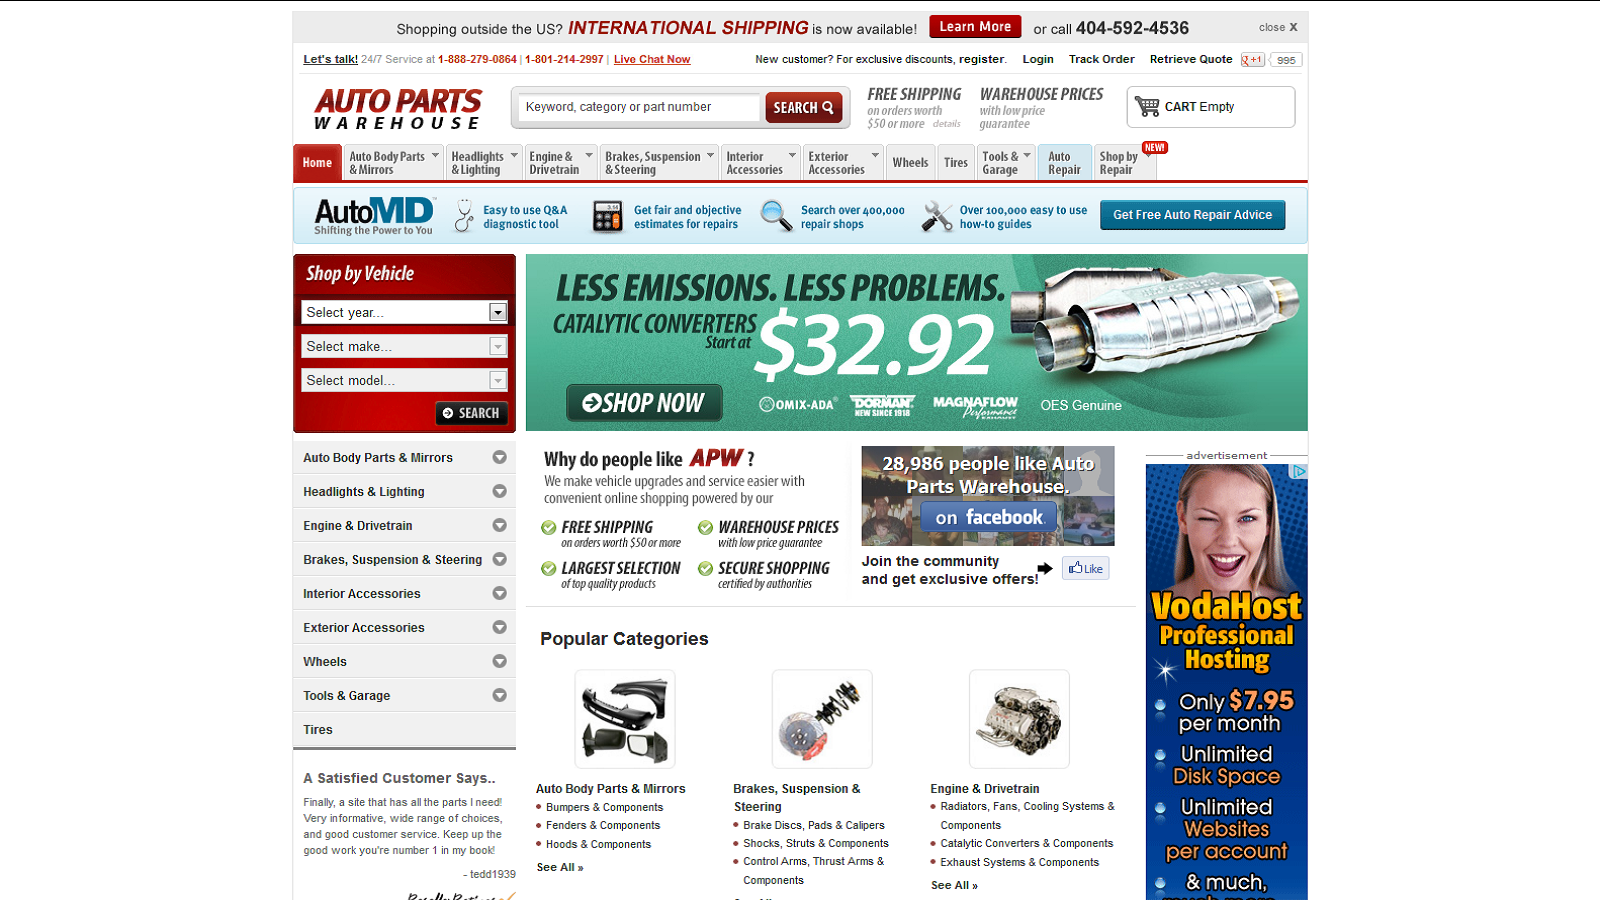 Get Discounts and Free Shipping On Auto Parts and Accessories!